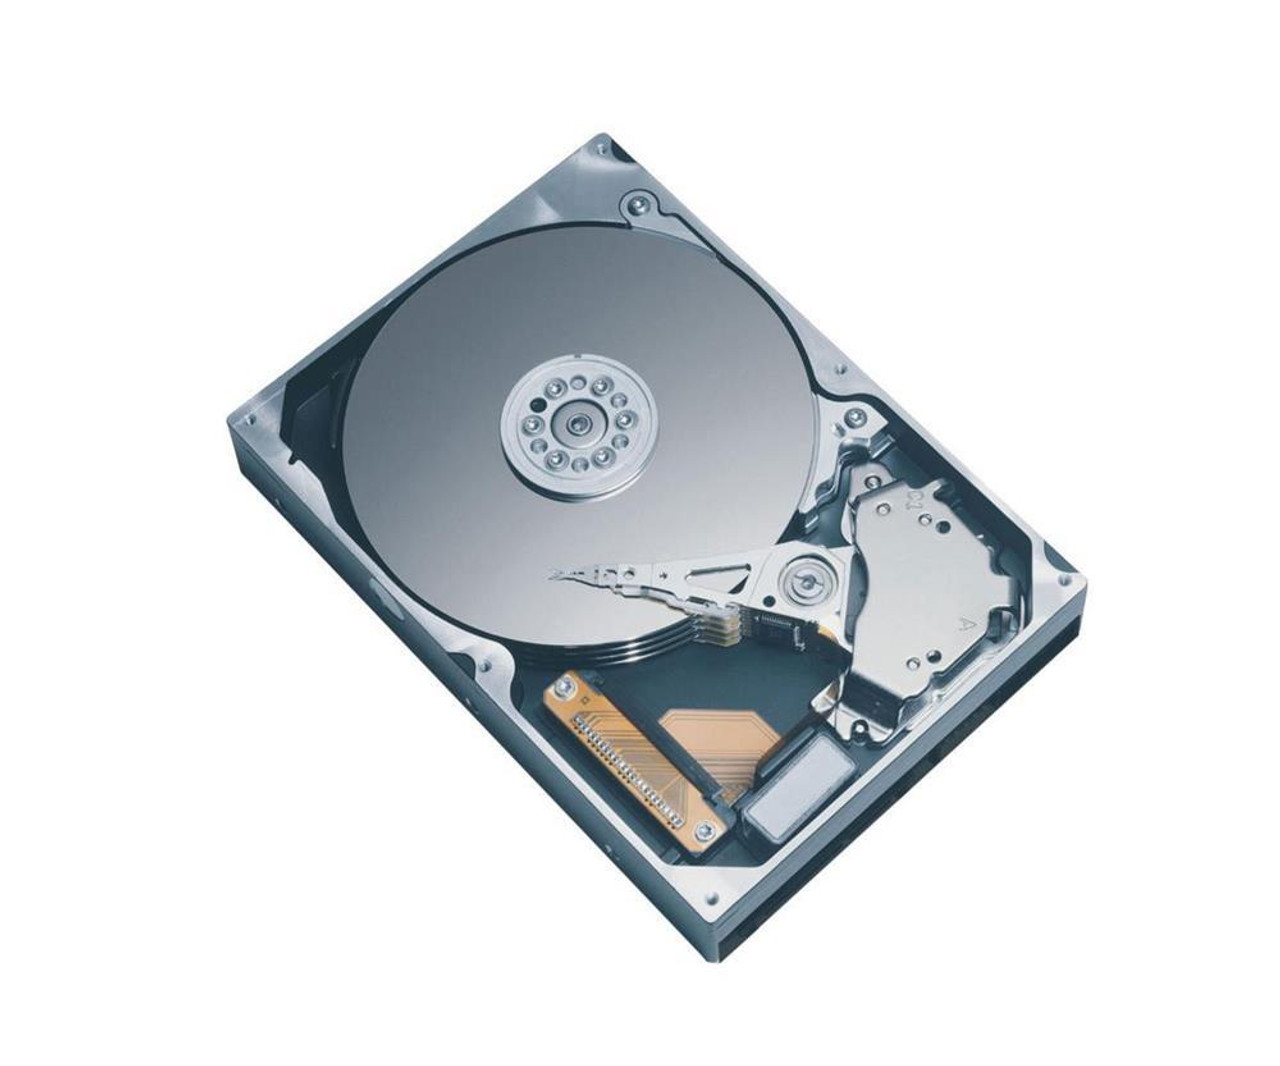 DISK-7310-AS3S6 Adaptec 73.4GB 10000RPM Ultra-320 SCSI 80-Pin 8MB Cache 3.5-inch Internal Hard Drive